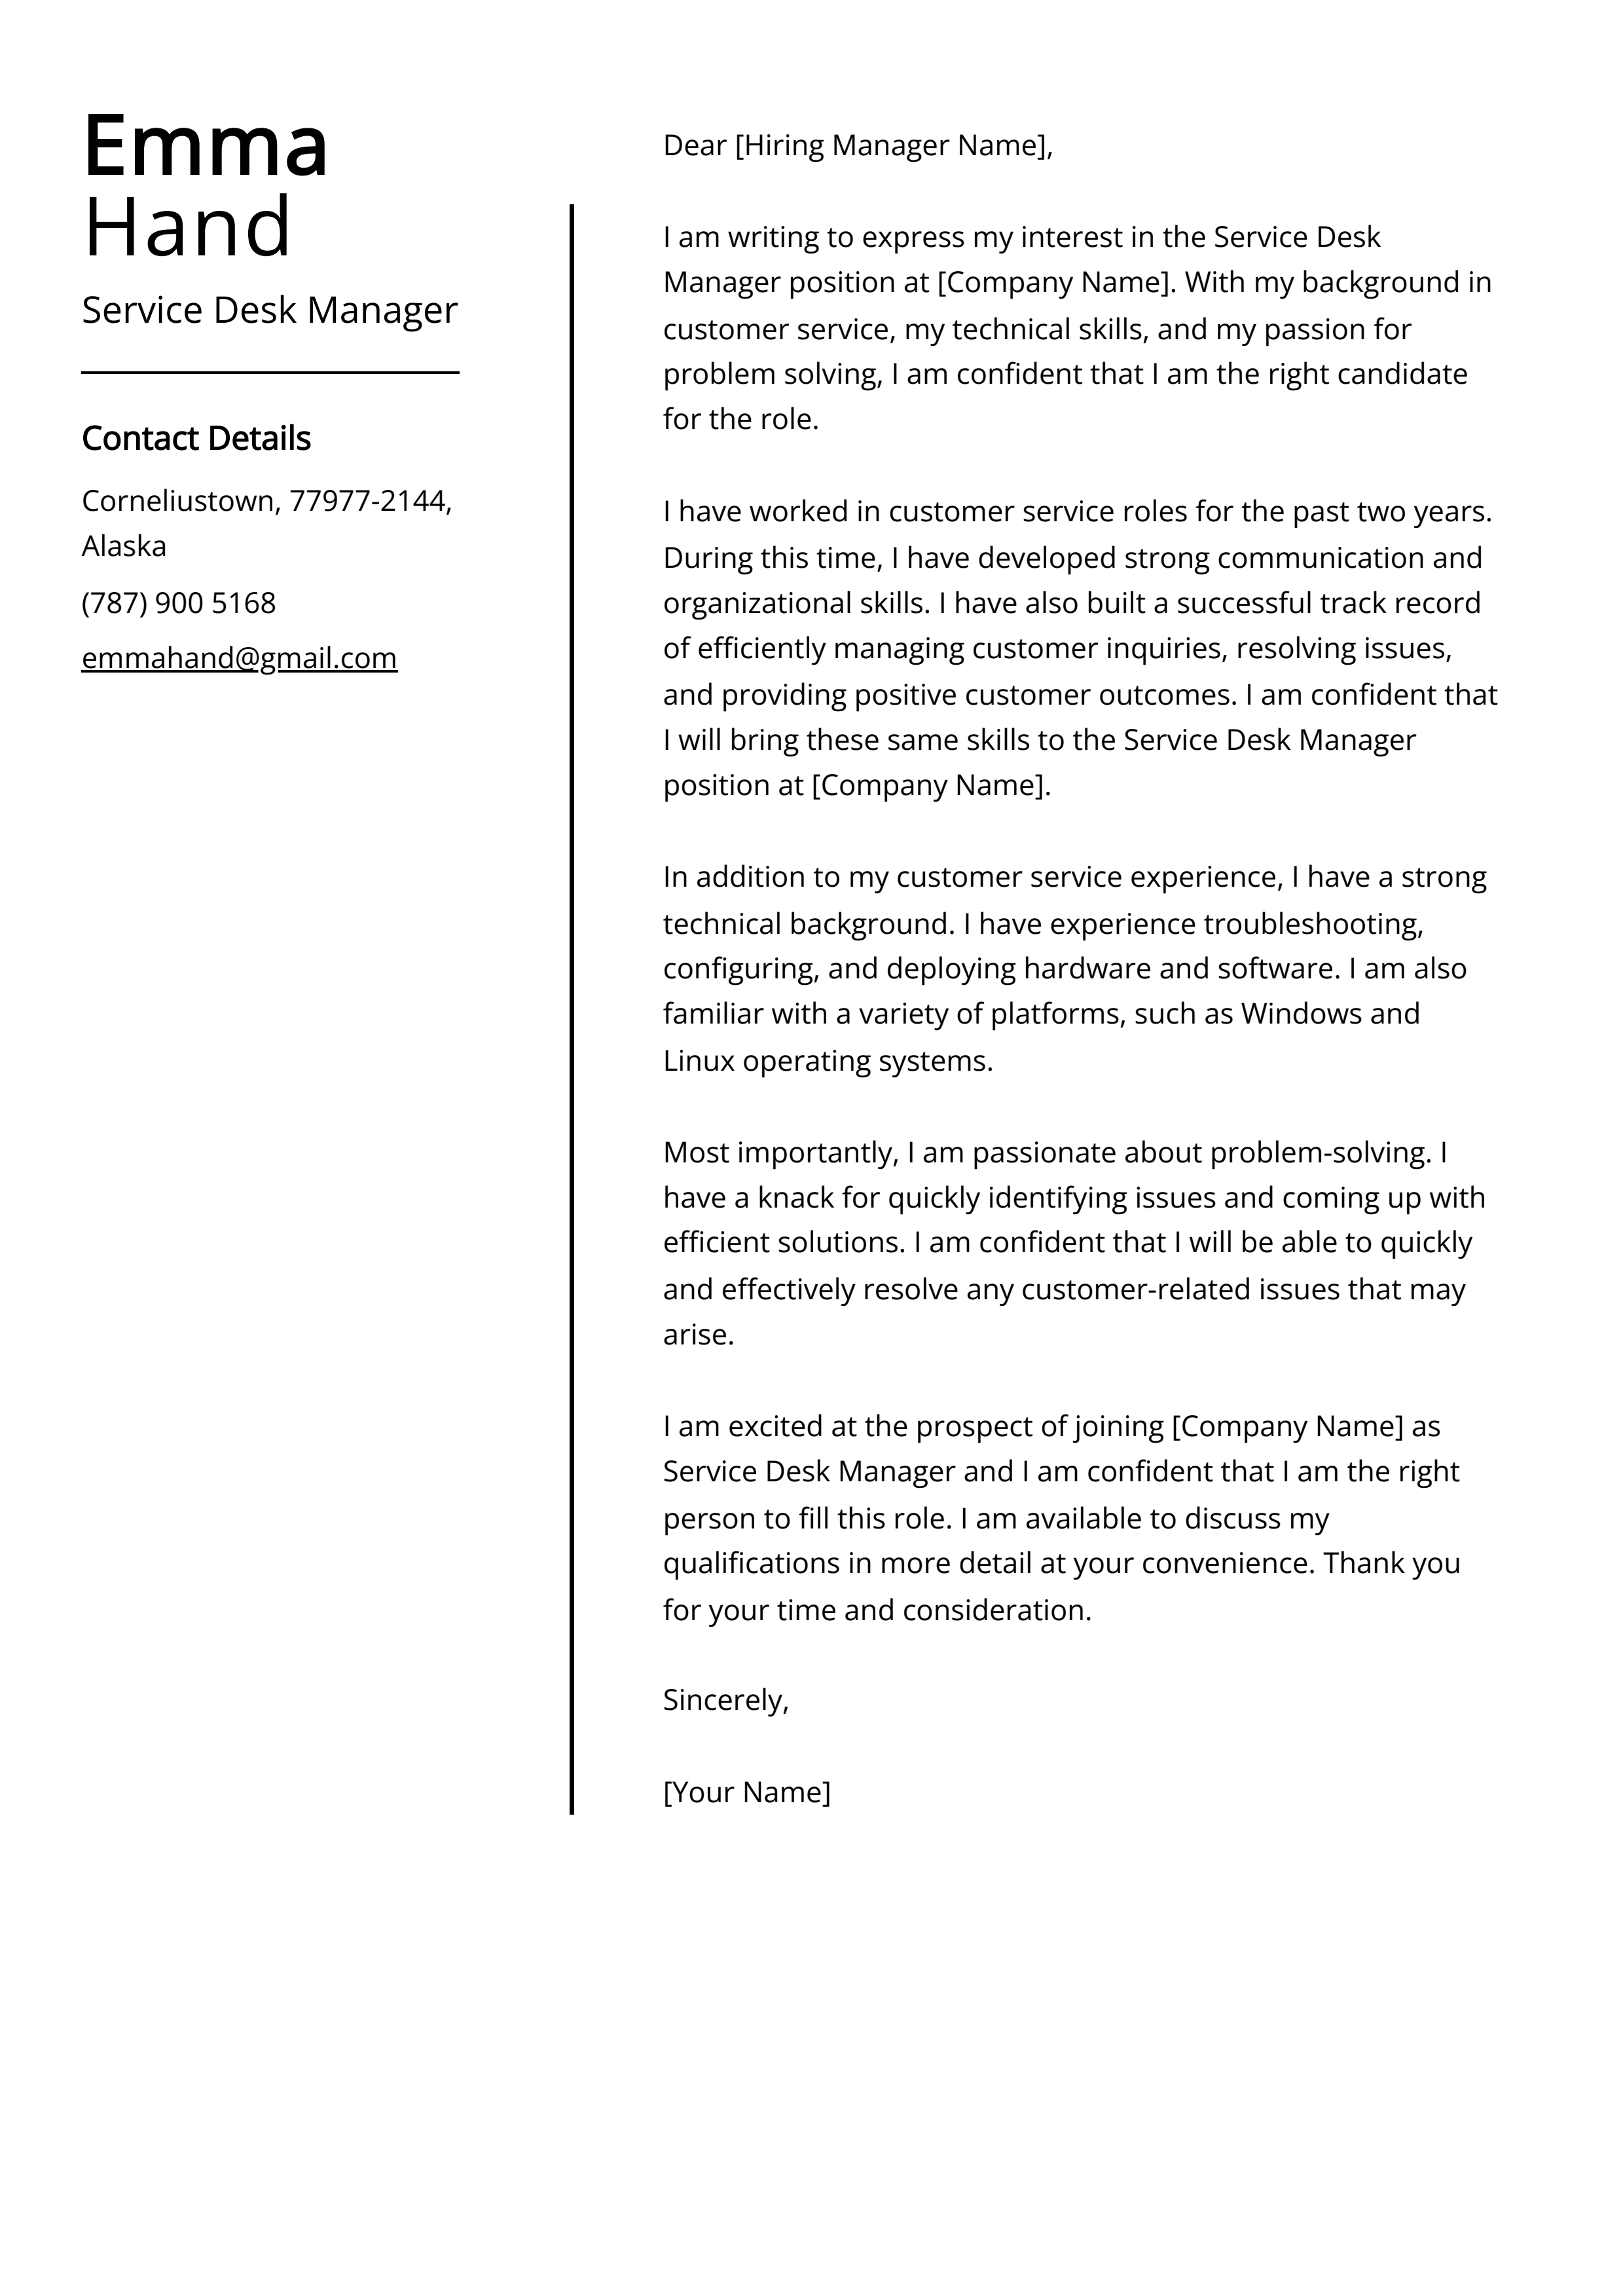 Service Desk Manager Cover Letter Example